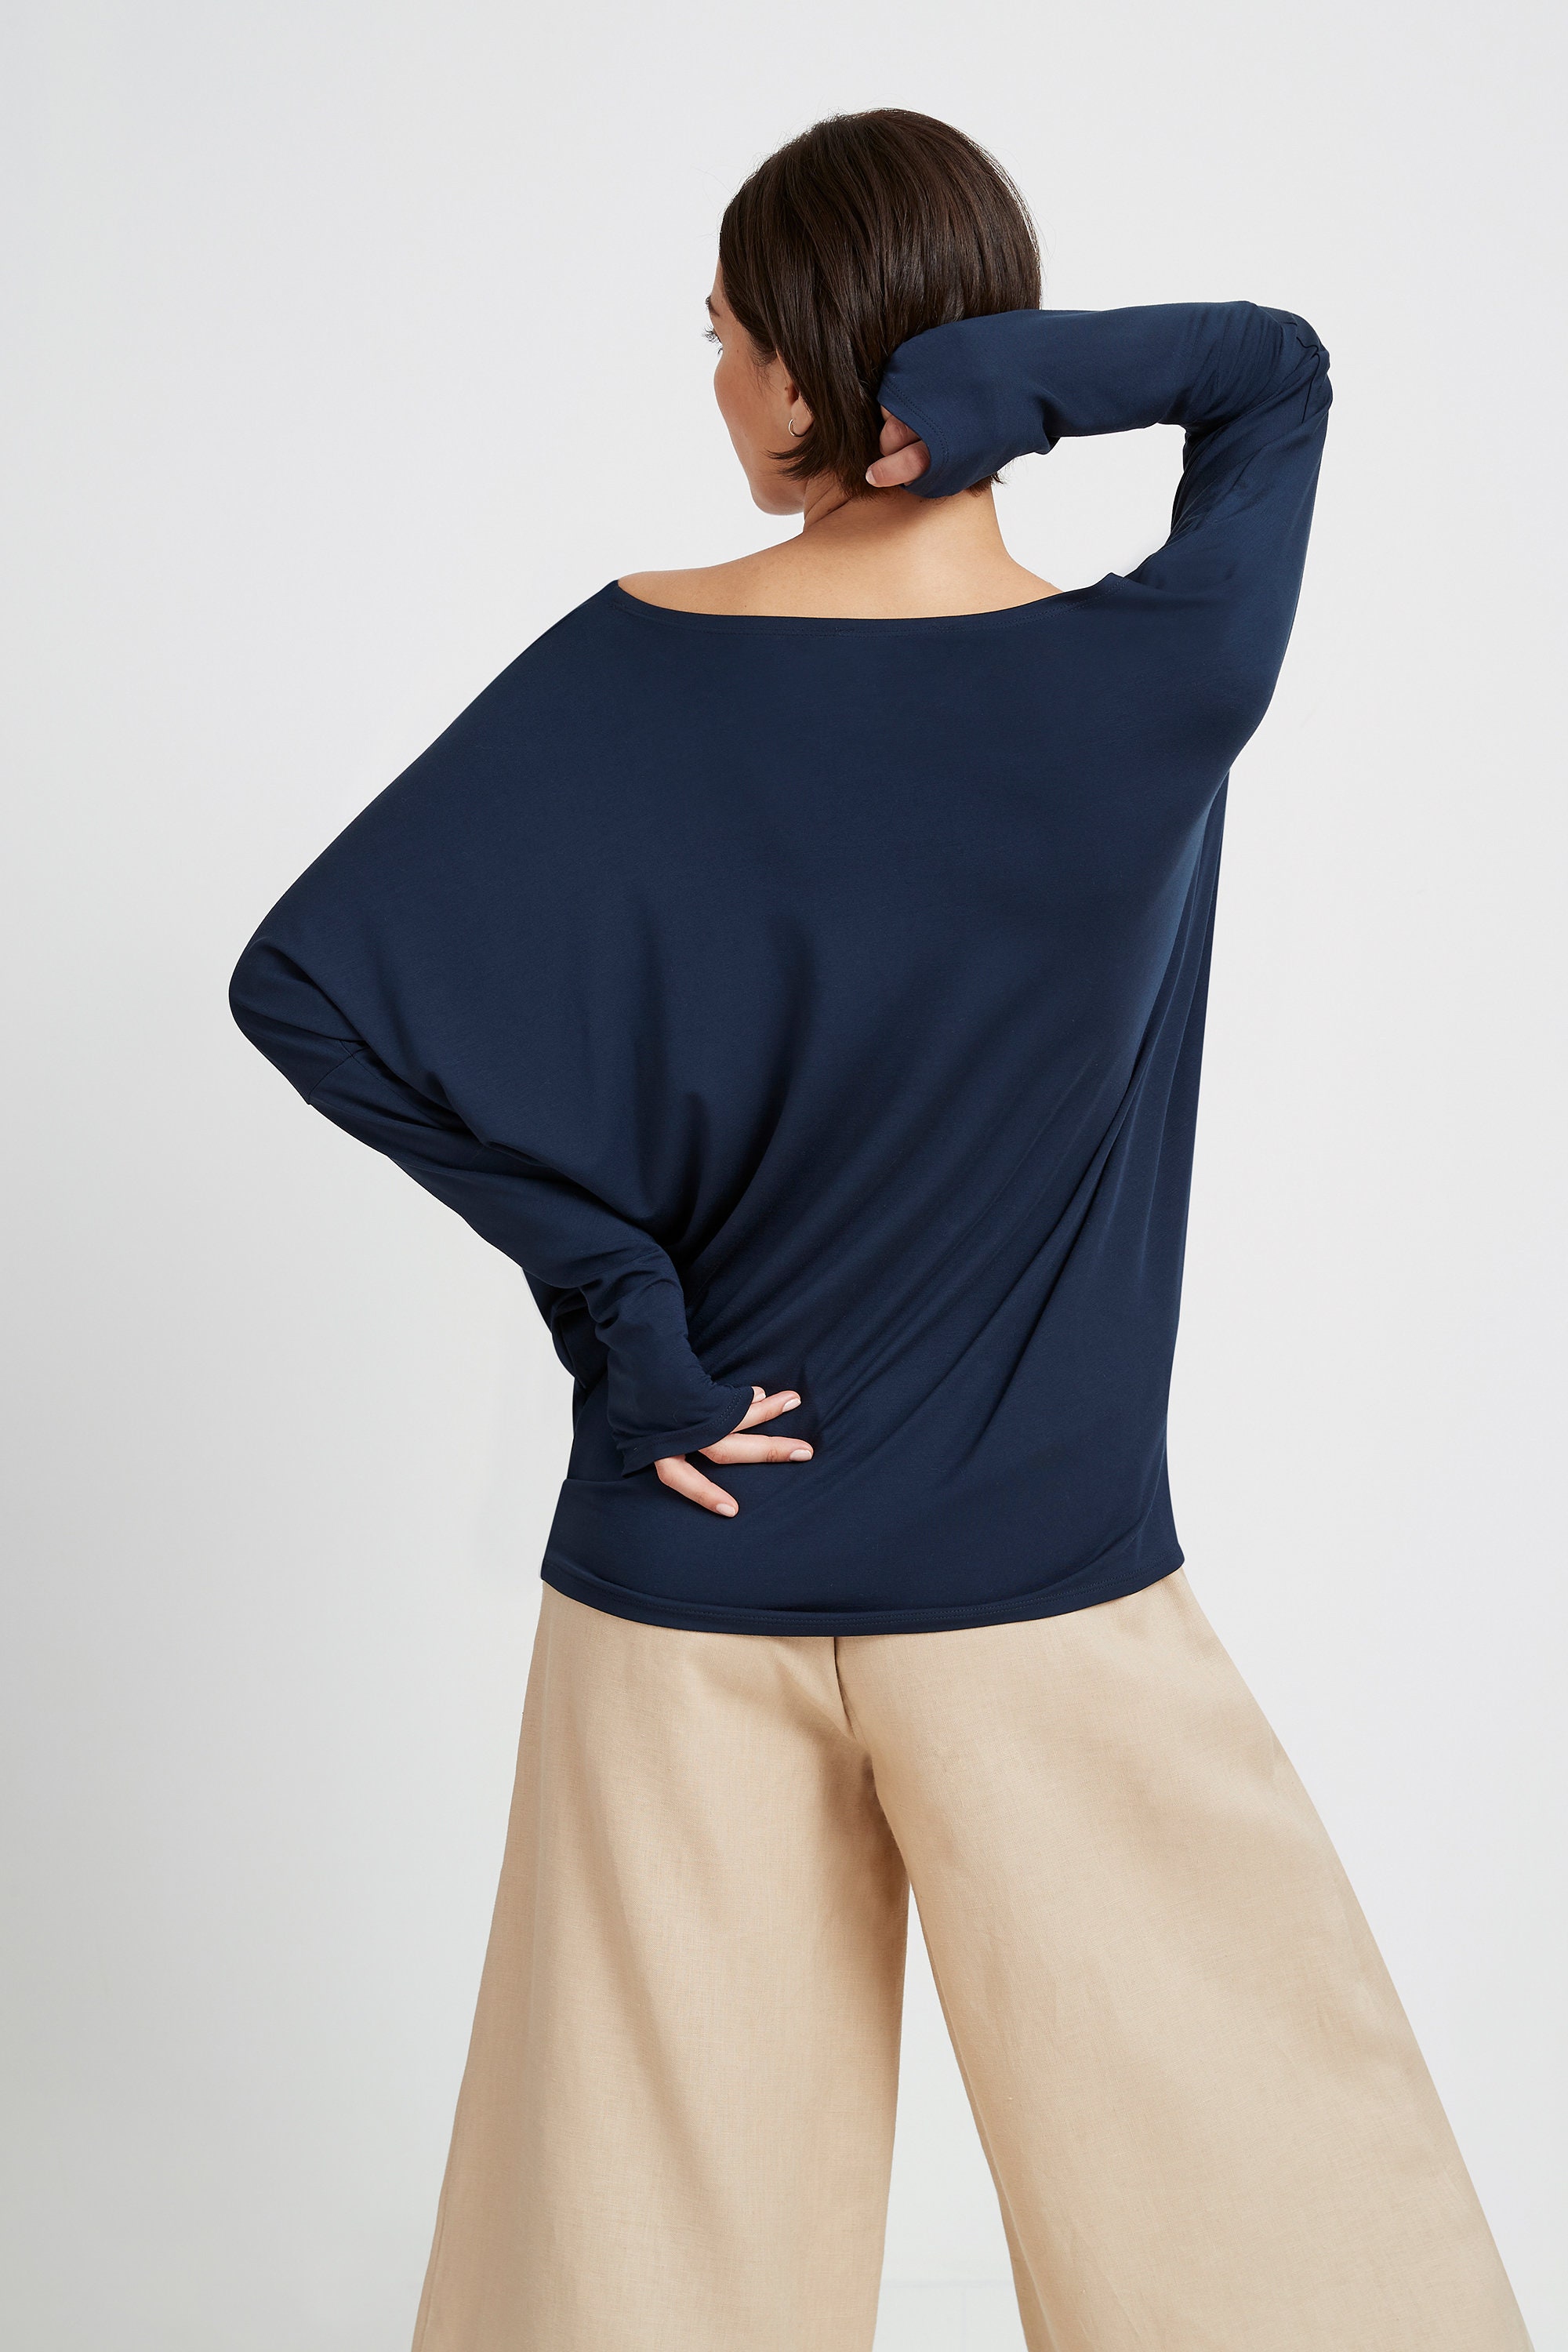 Dolman Sleeve Top, Batwing Sleeve Blouse, Long Sleeve Top, off the 